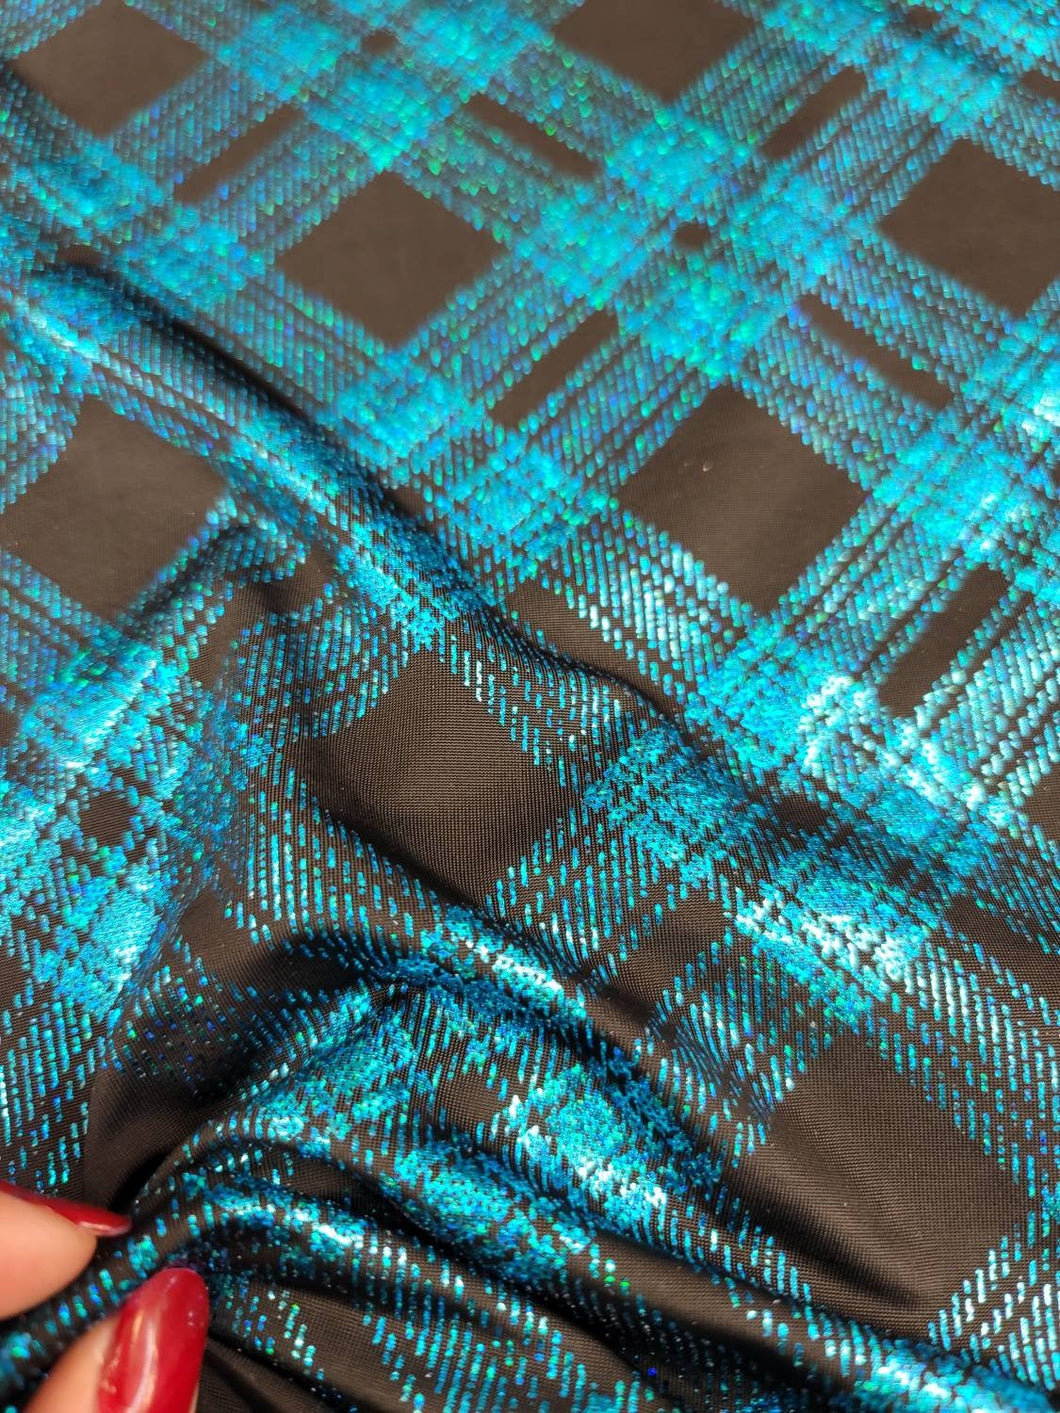 Fabric Sold By The Yard Black Stretch Electric Blue Iridescent Checkered Pattern Fashion New Draping Clothing Dress Decoration Dancer